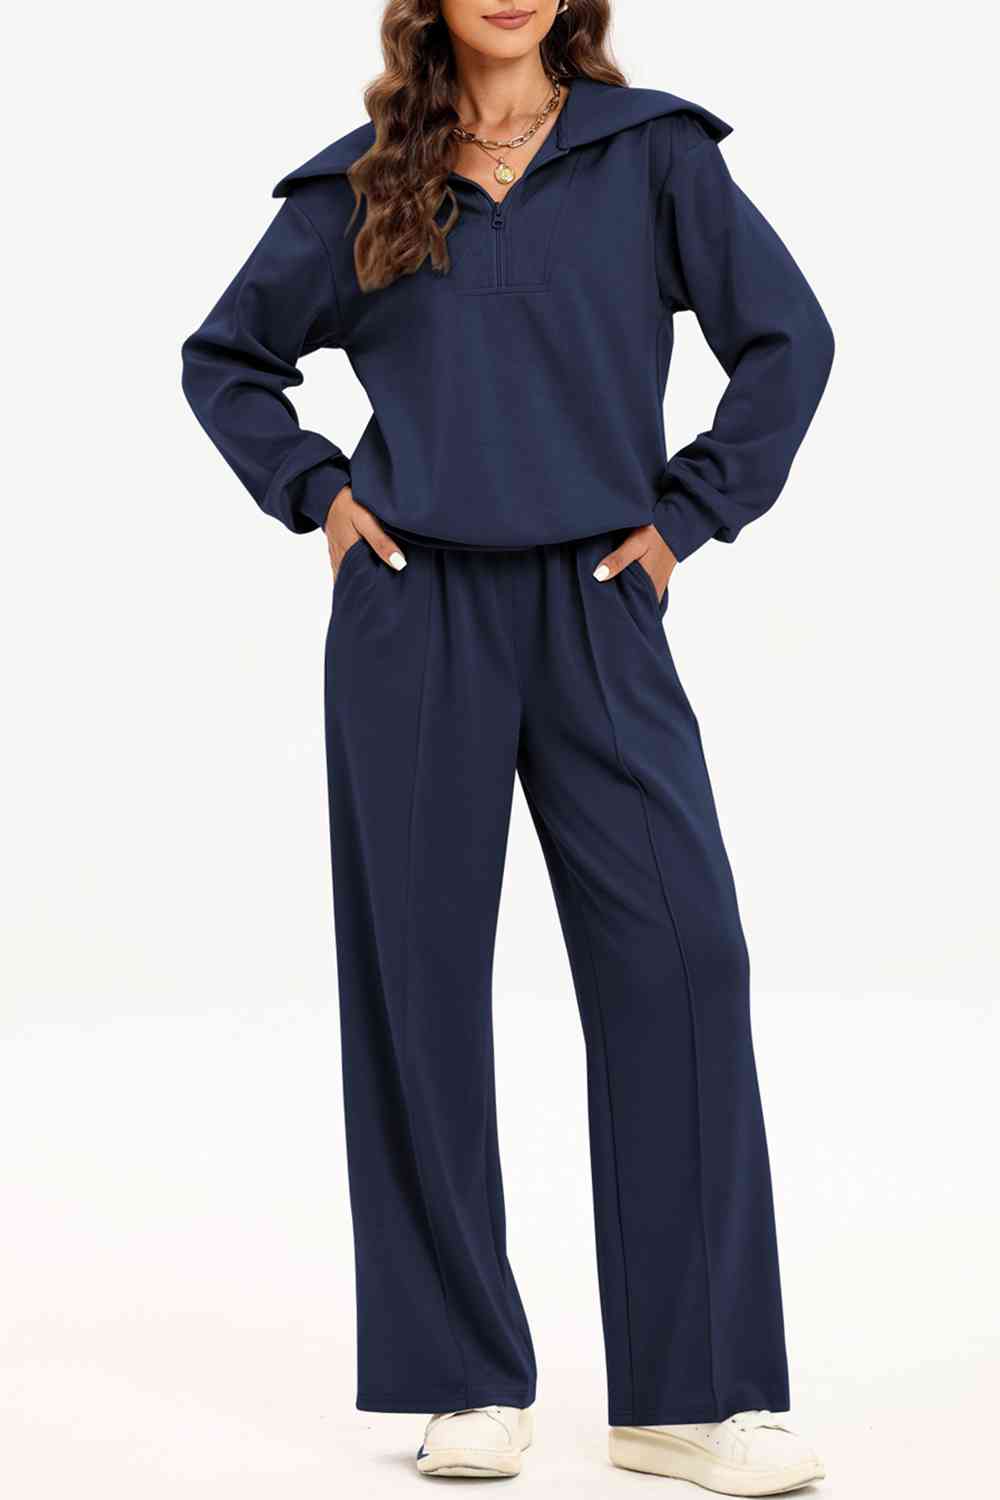 Half Zip Collared Neck Sweatshirt and Pants Set - 2 piece set - Wild Willows Boutique - Massapequa, NY, affordable and fashionable clothing for women of all ages. Bottoms, tops, dresses, intimates, outerwear, sweater, shoes, accessories, jewelry, active wear, and more // Wild Willow Boutique.